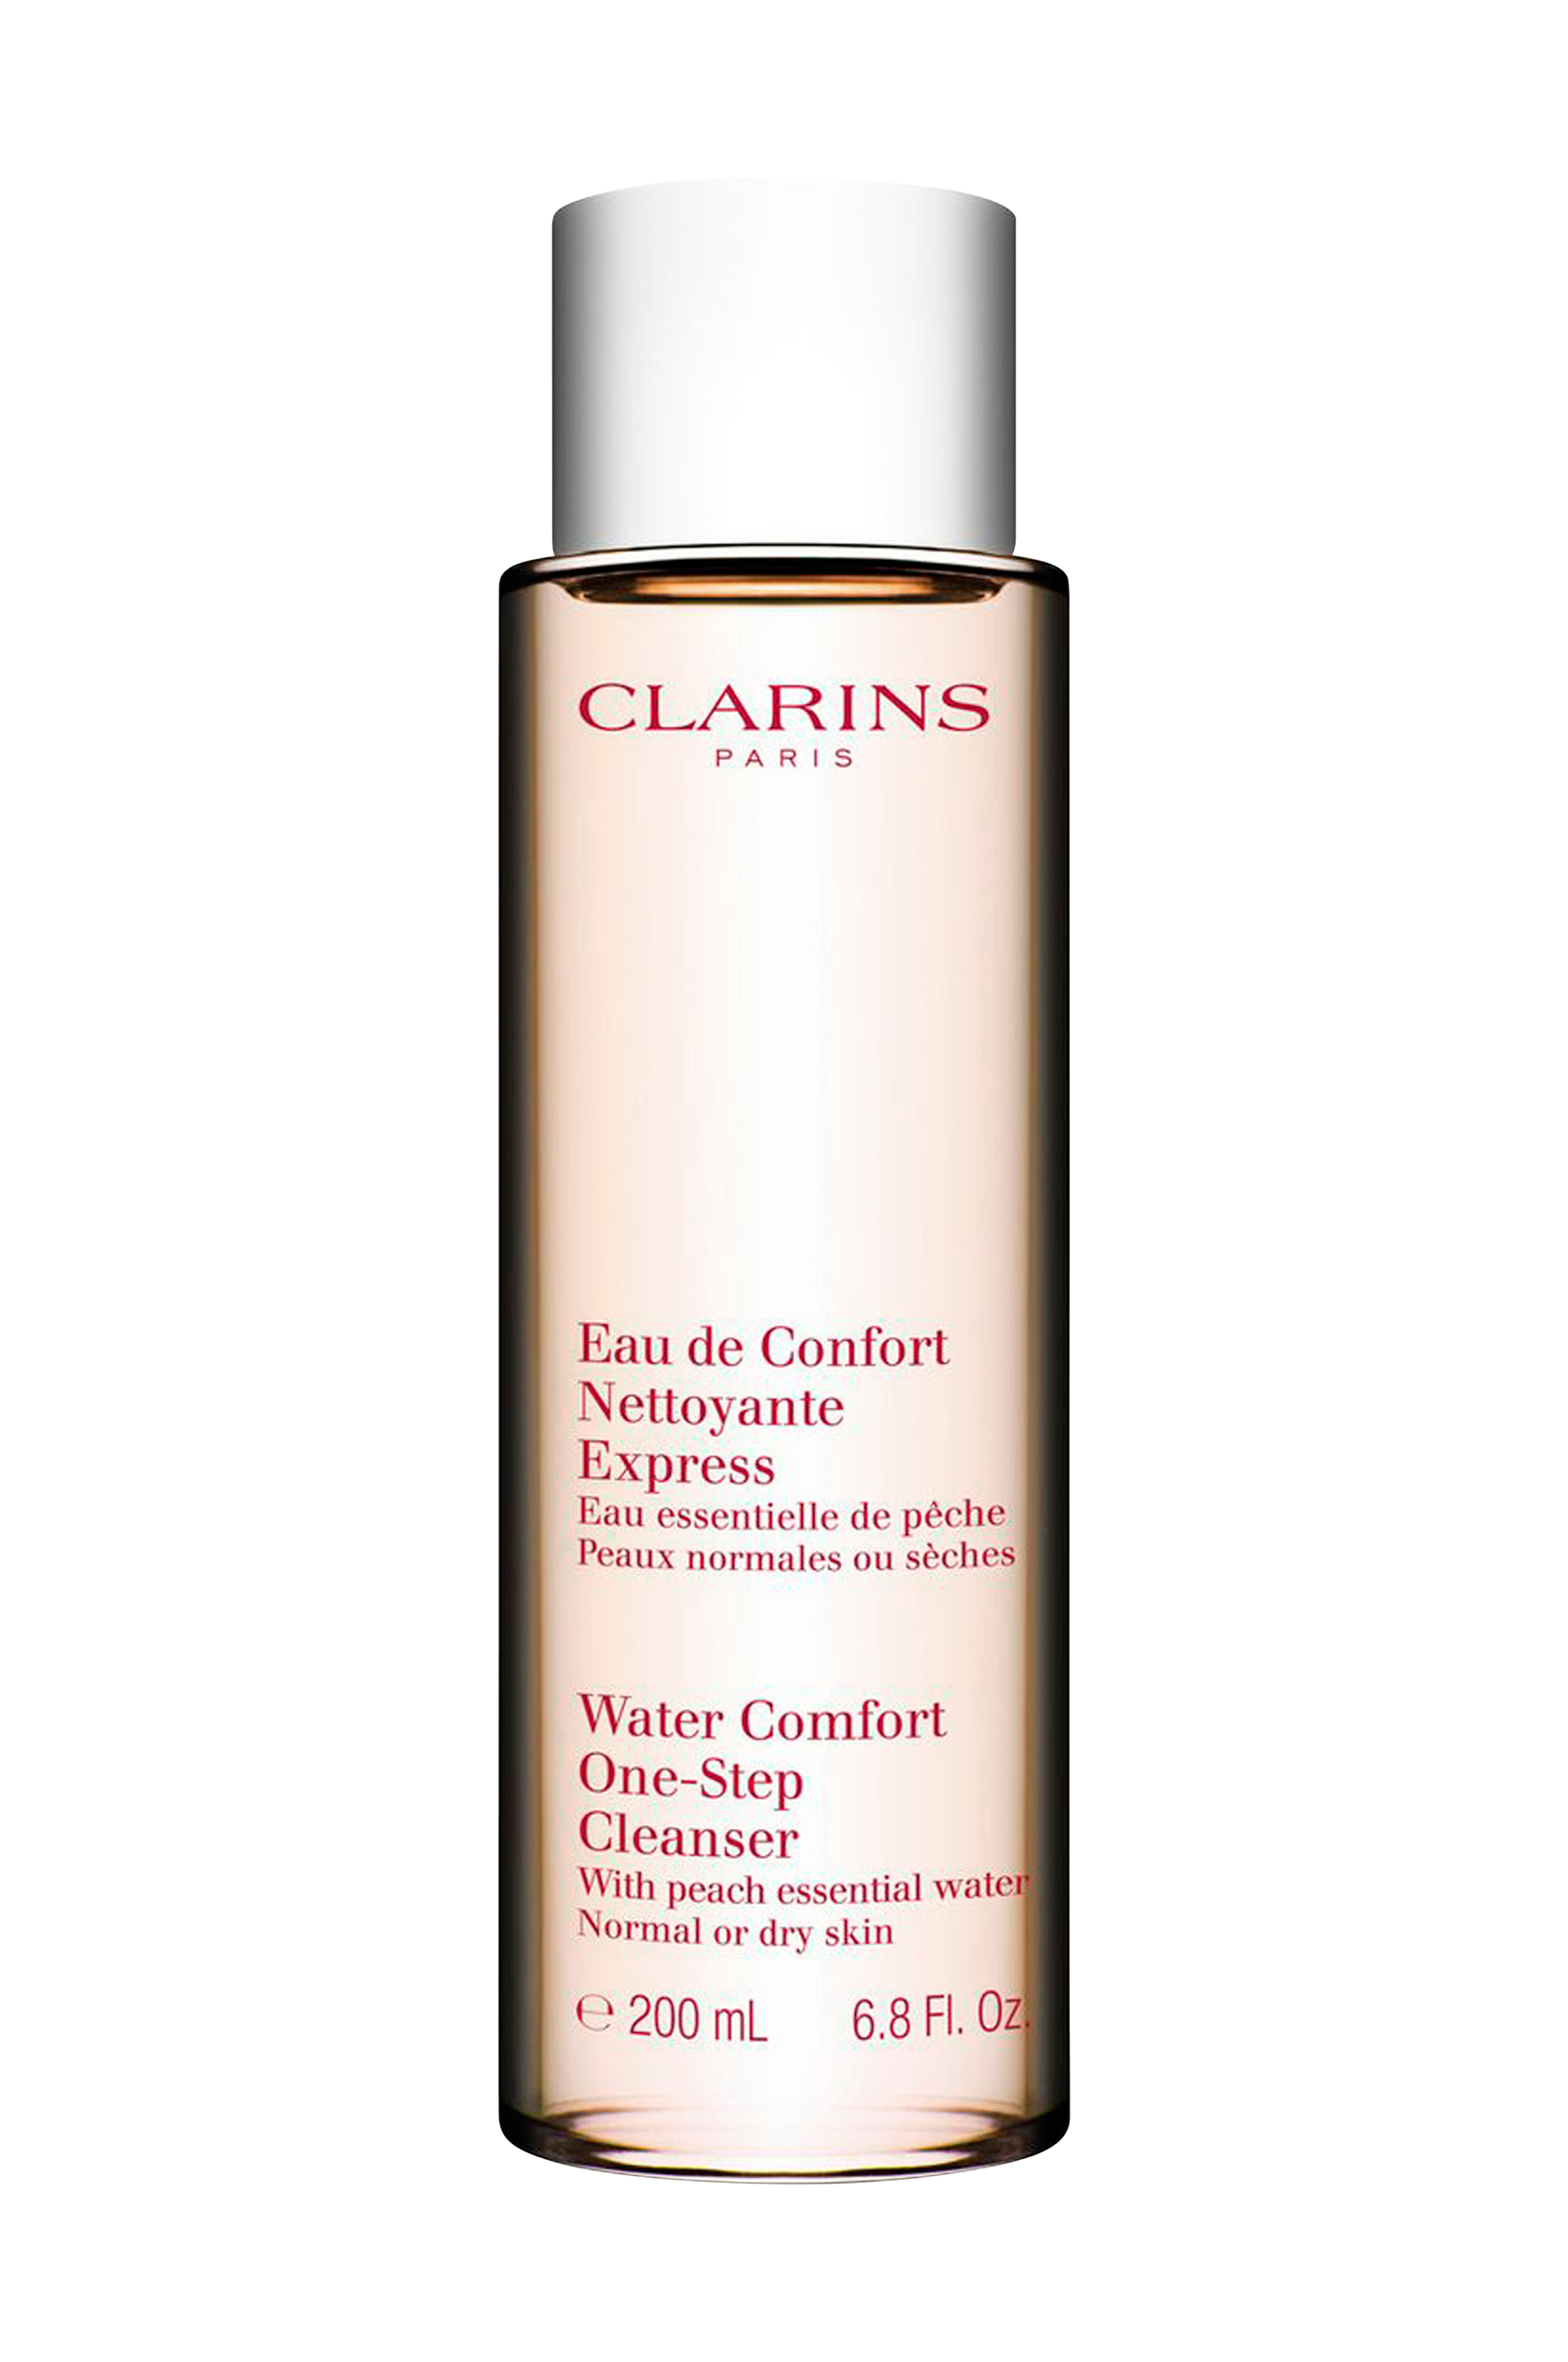 Water Comfort One-Step Cleanser 200 ml, Clarins